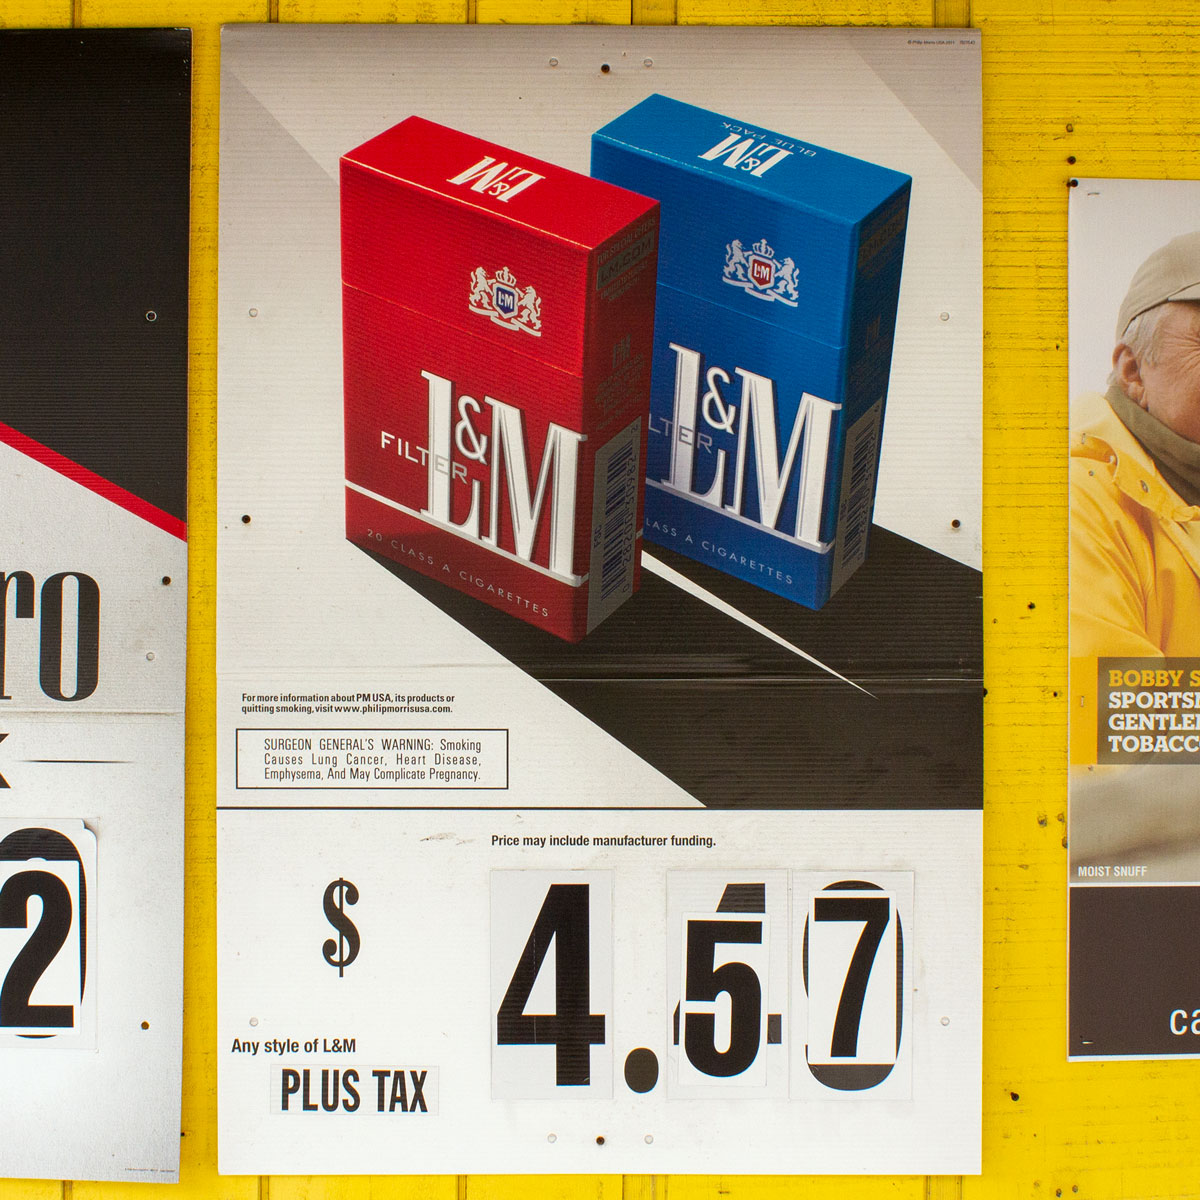 Cigarette advertisement where numbers indicating price have been pasted over with new numbers